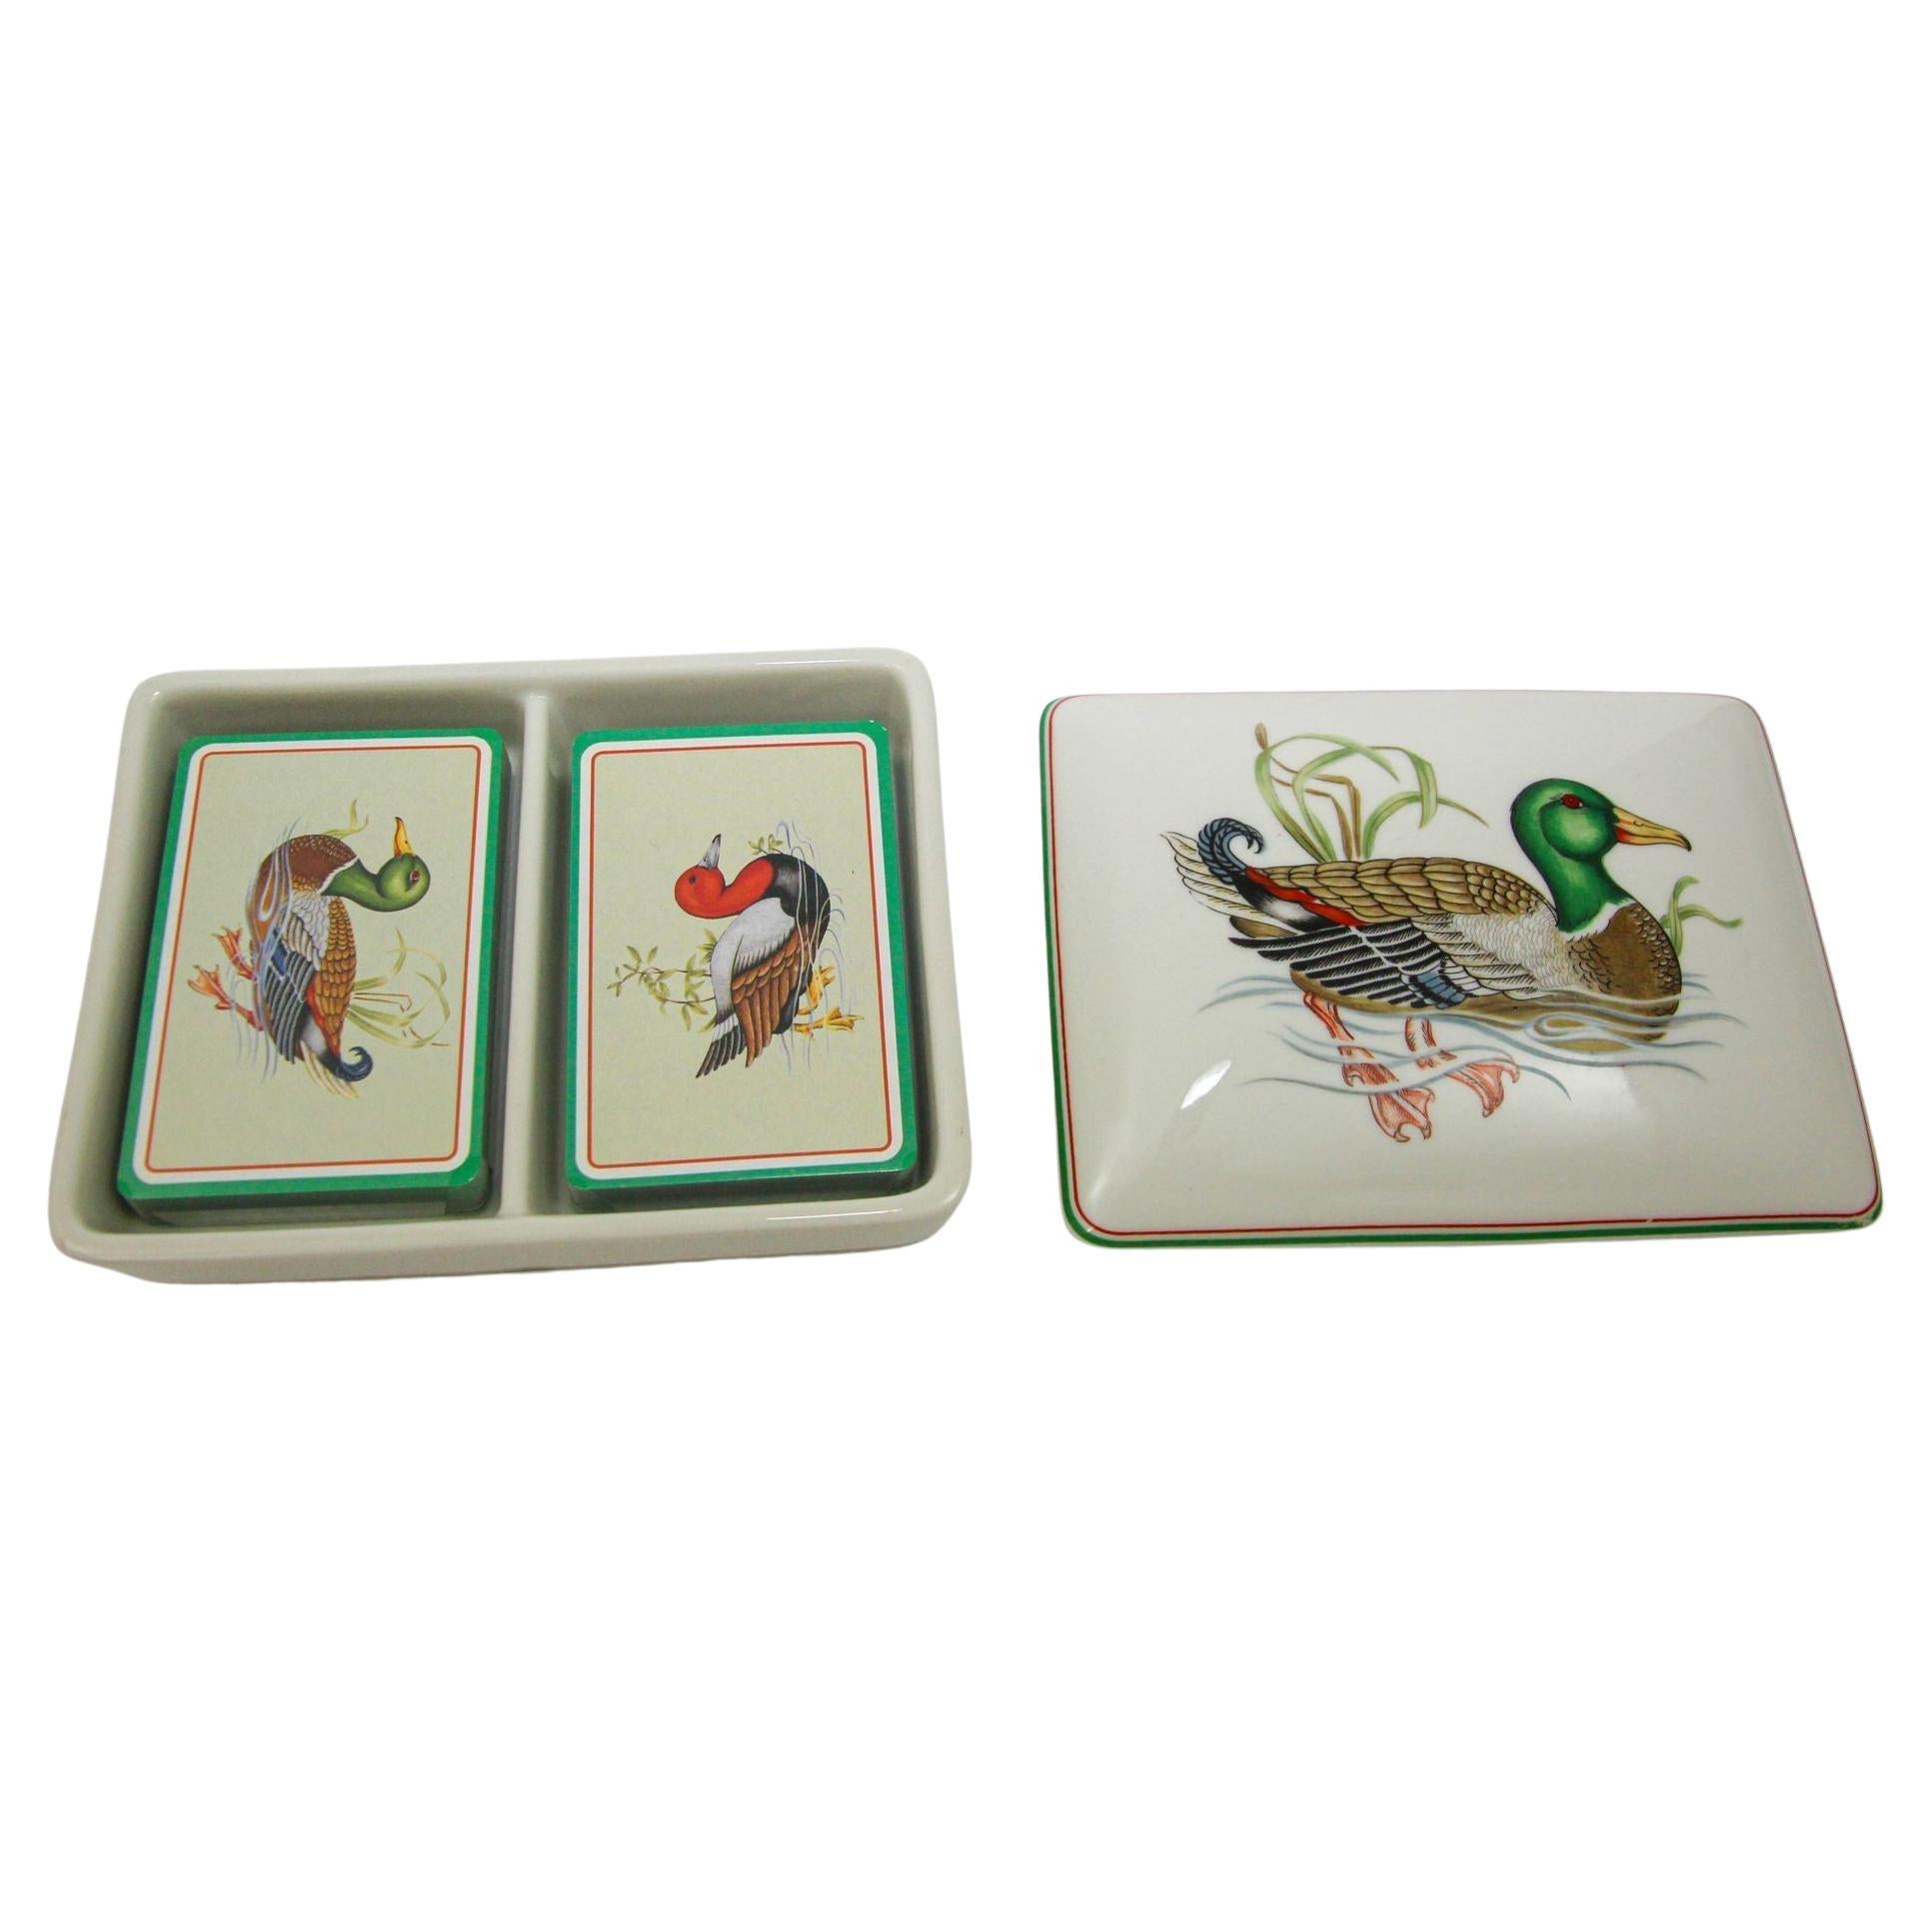 Fitz and Floyd Porcelain Box with Bridge Playing Cards 1980 Japan